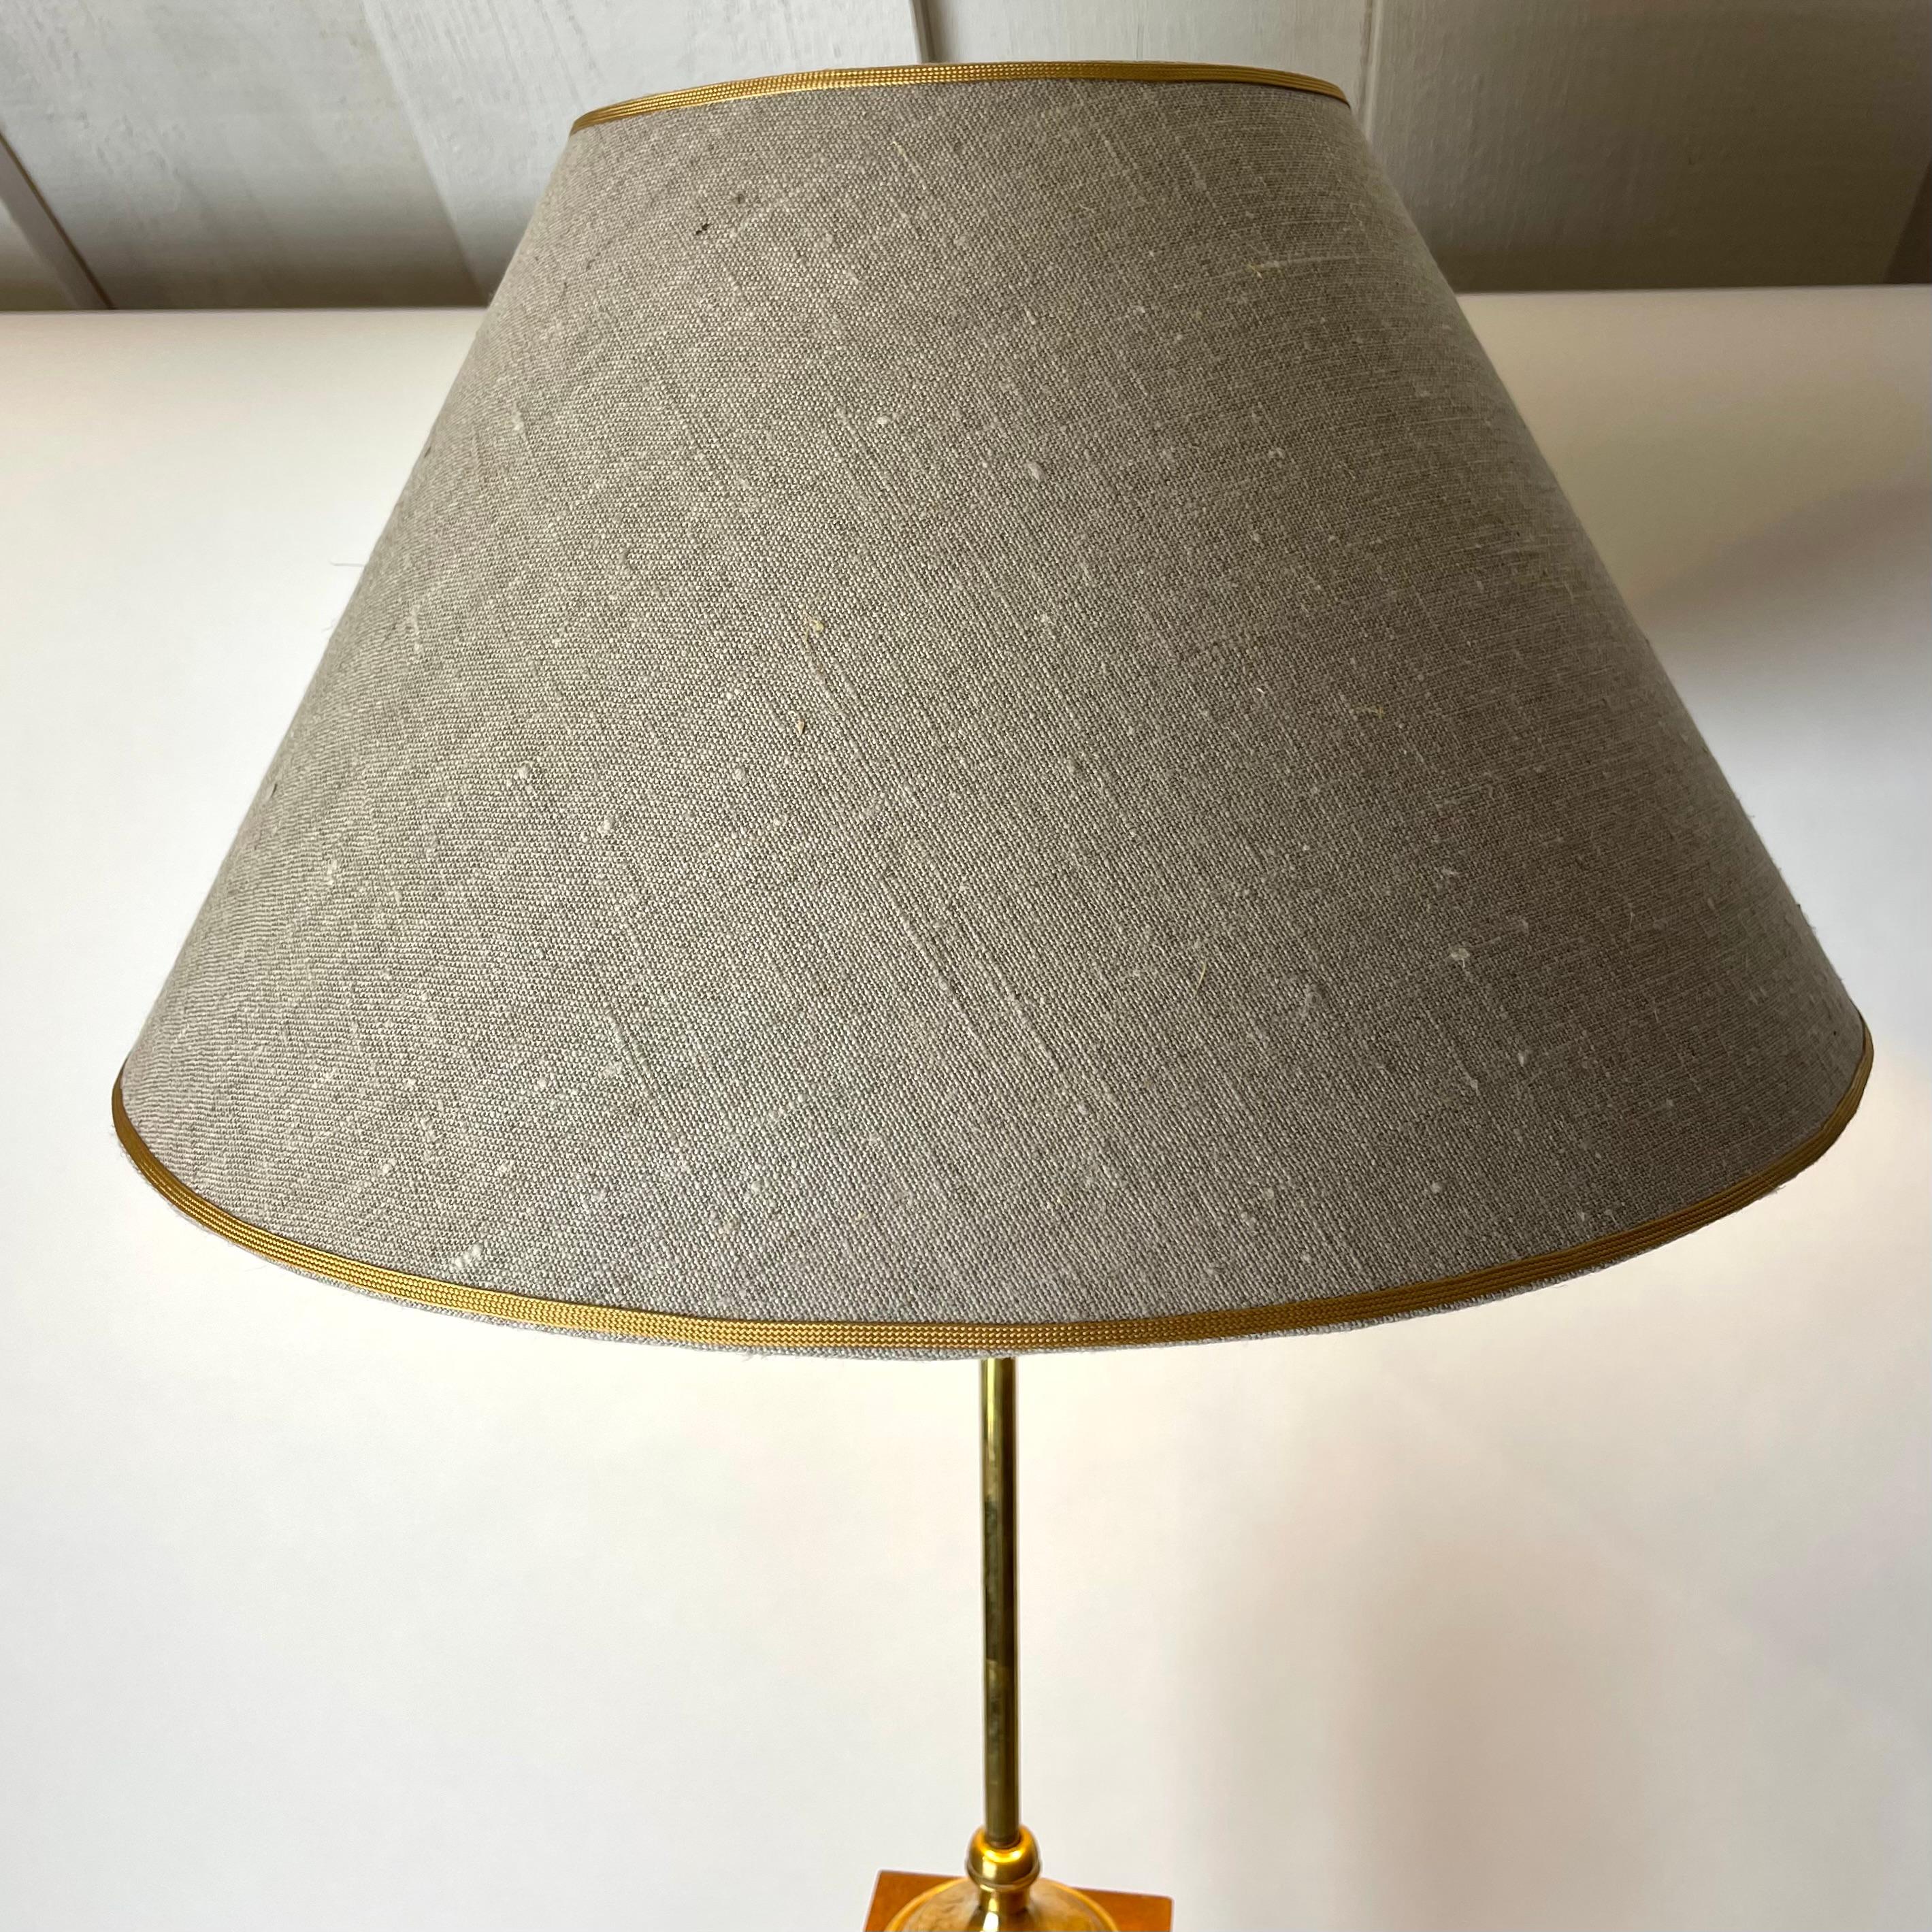 Large Table Lamp in ”Grand Tour” style from early 20th Century For Sale 4